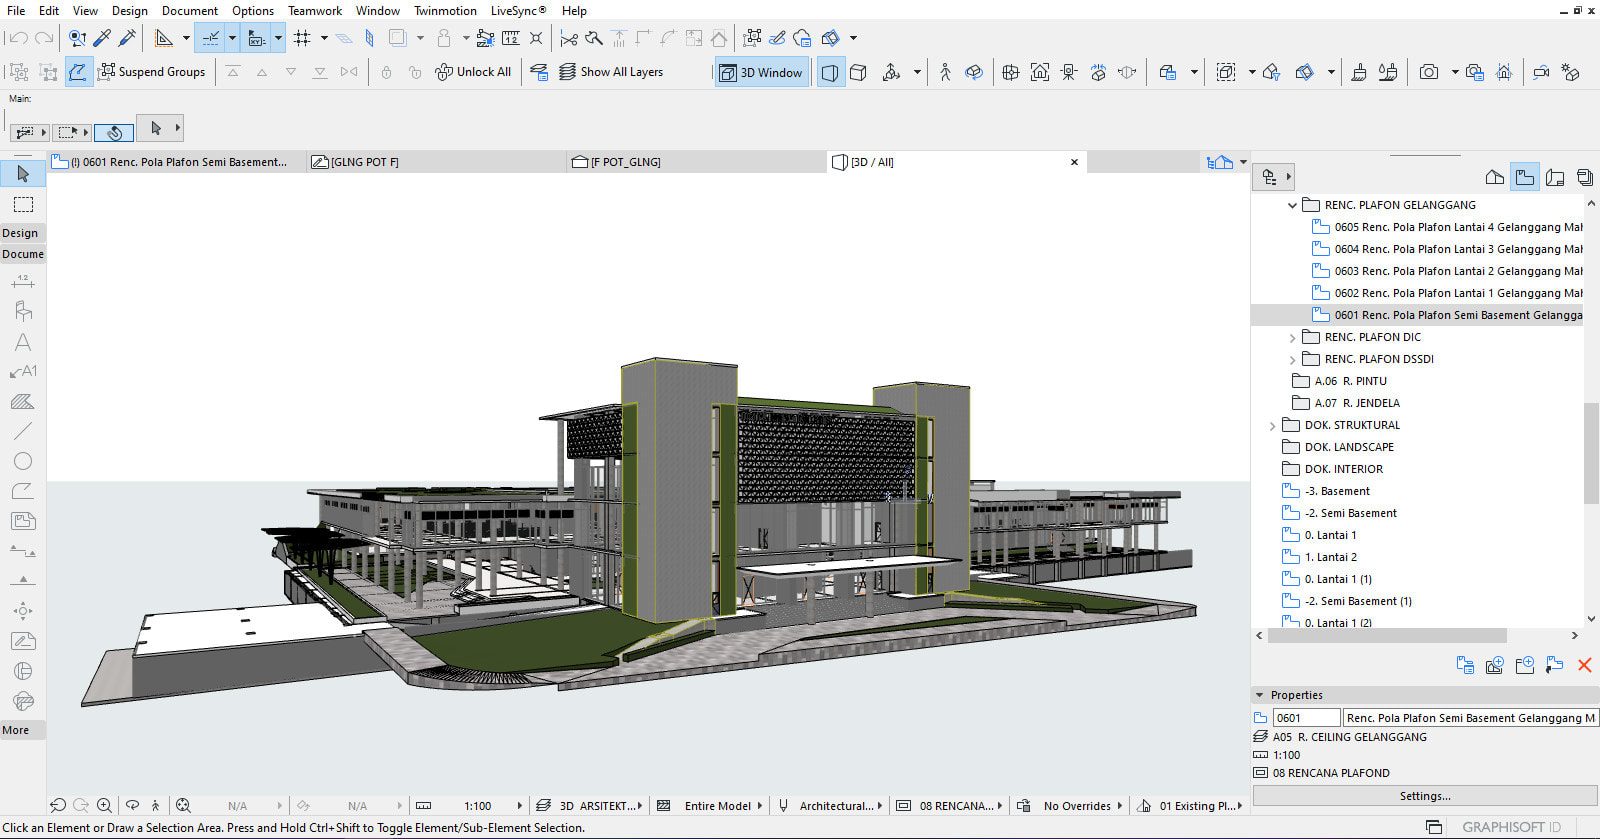 archicad bim experience kit download